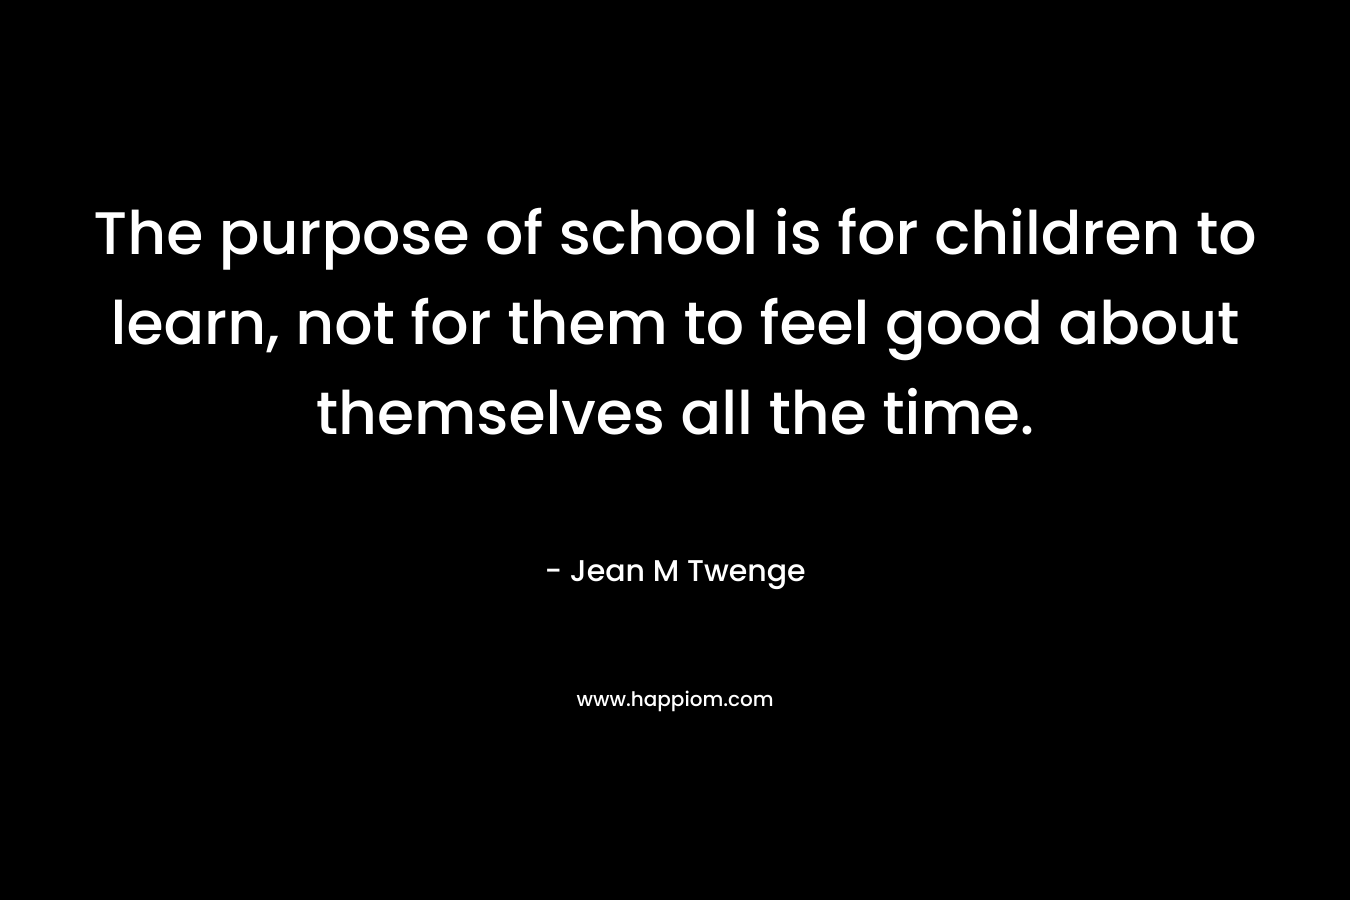 The purpose of school is for children to learn, not for them to feel good about themselves all the time. – Jean M Twenge